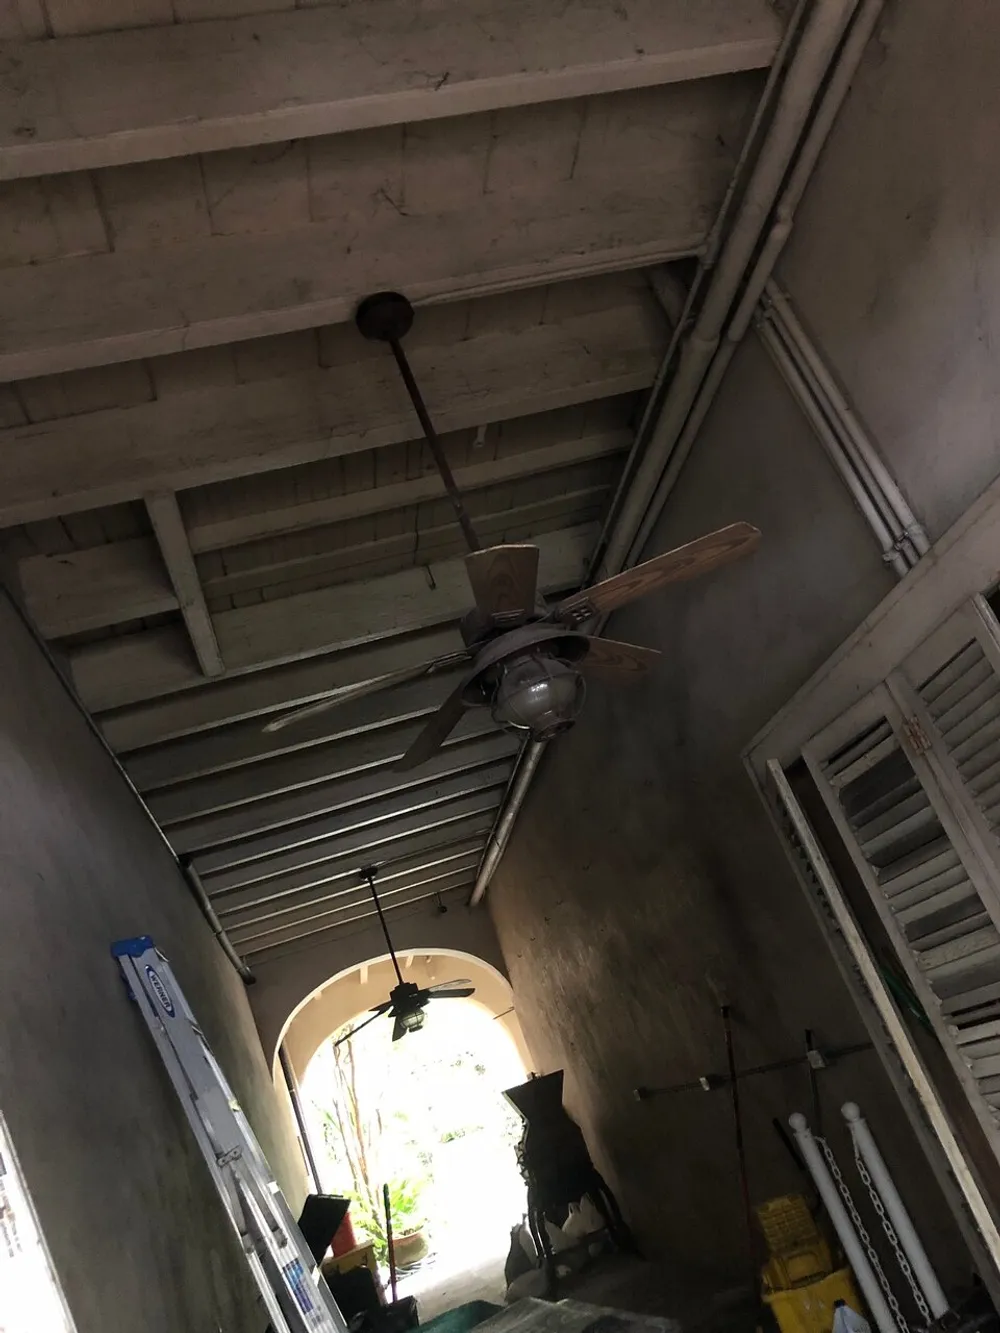 A ceiling fan is installed in a dimly lit narrow corridor with various items stored along the sides and daylight can be seen at the far end